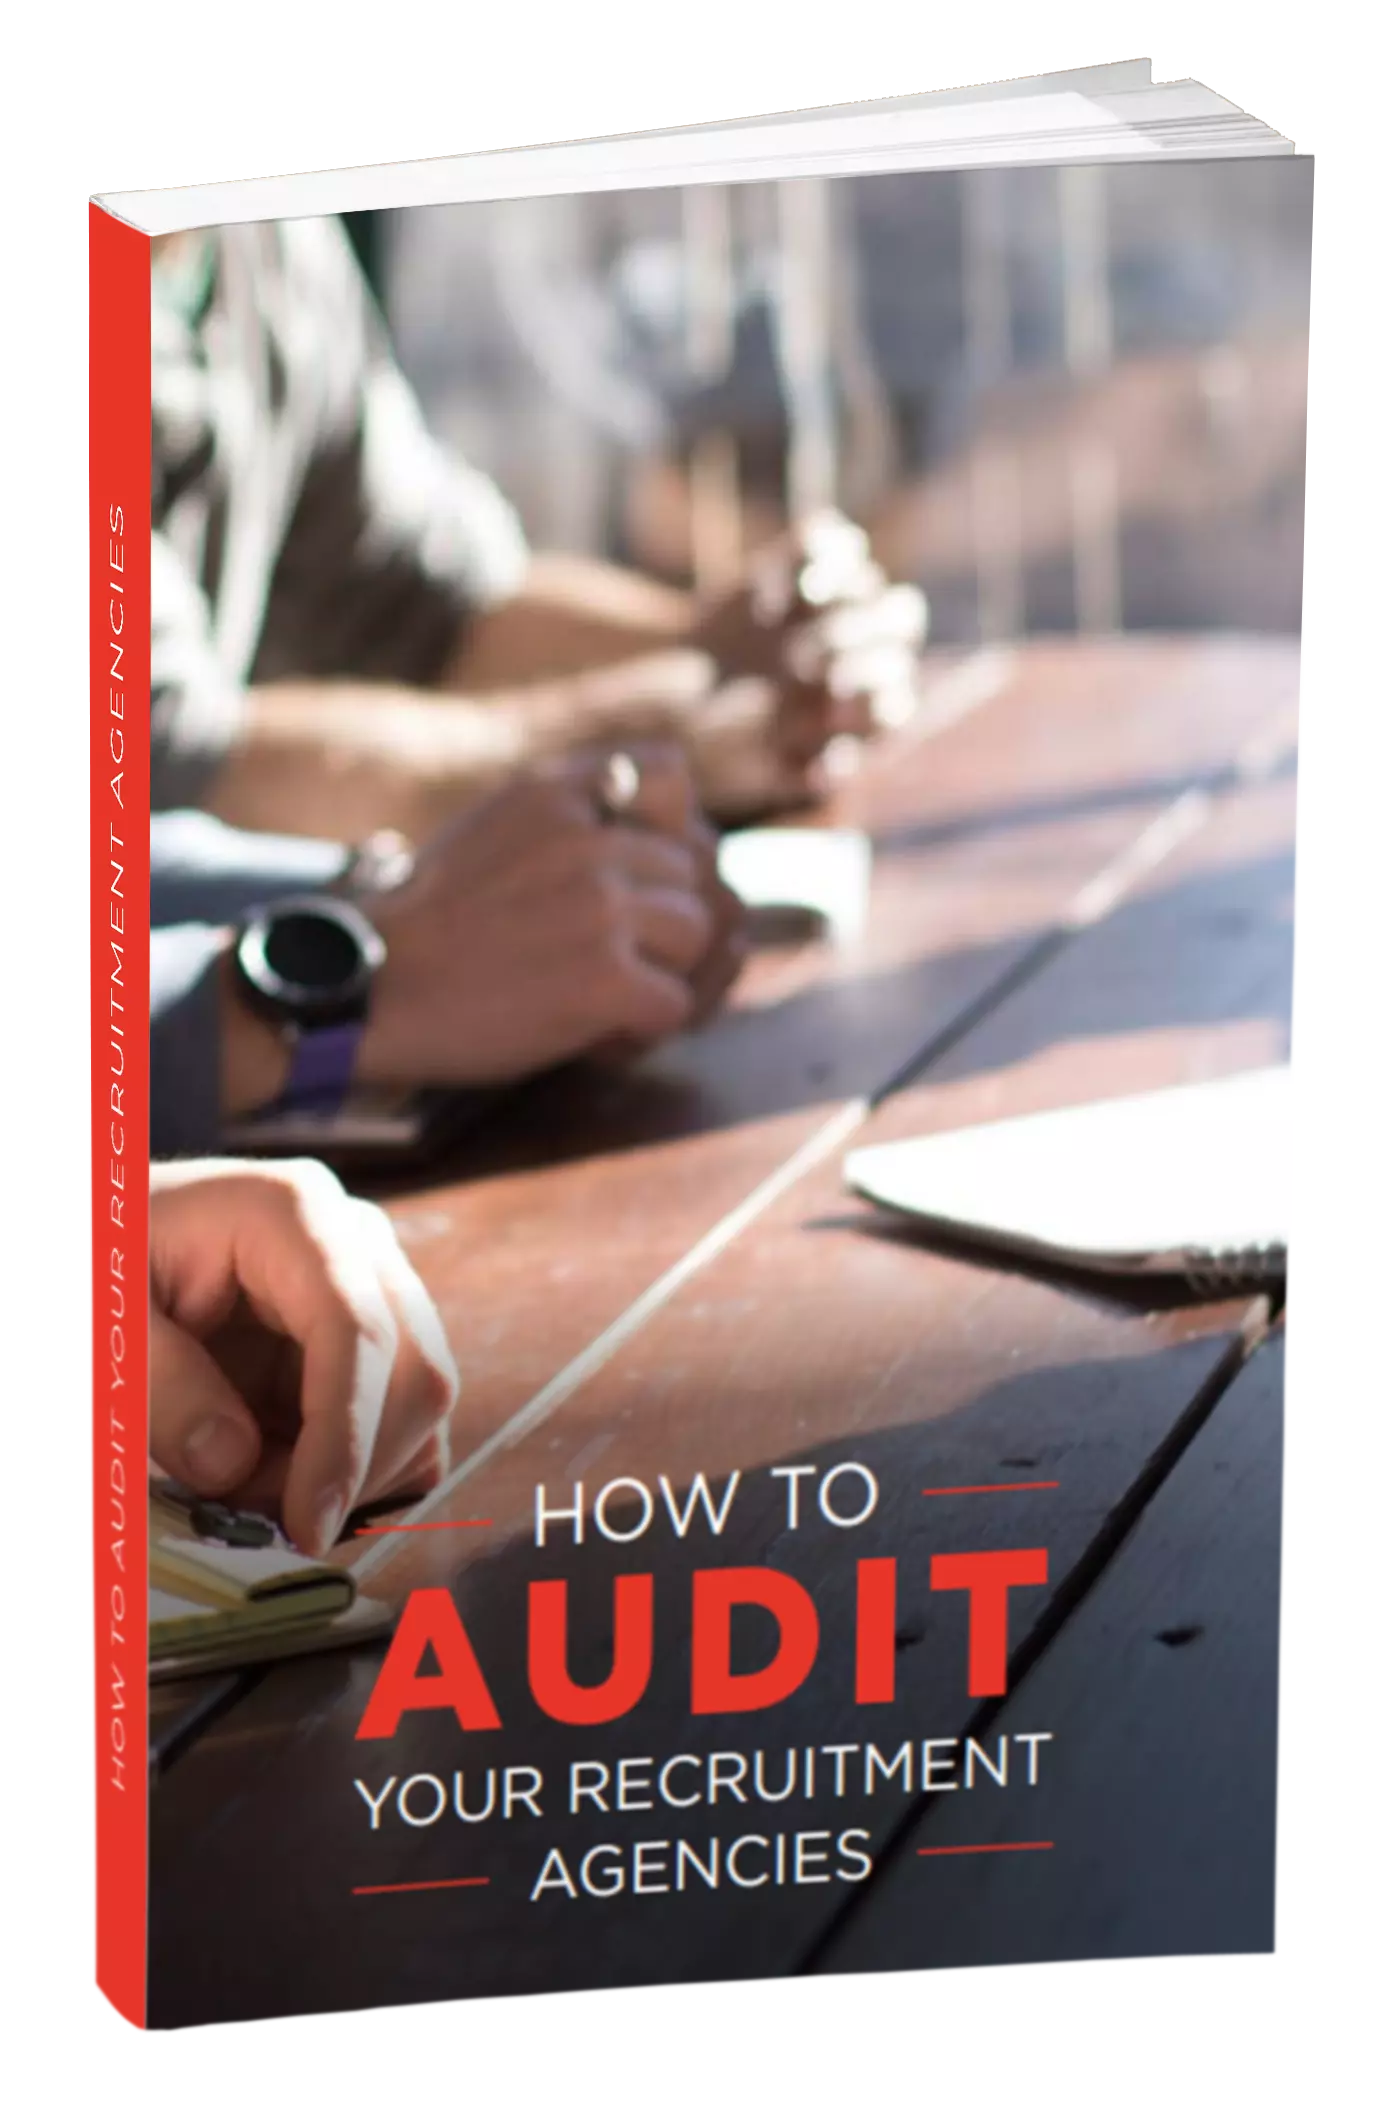 Ebook-Cover-how-to-audit-your-recruitment-agencies